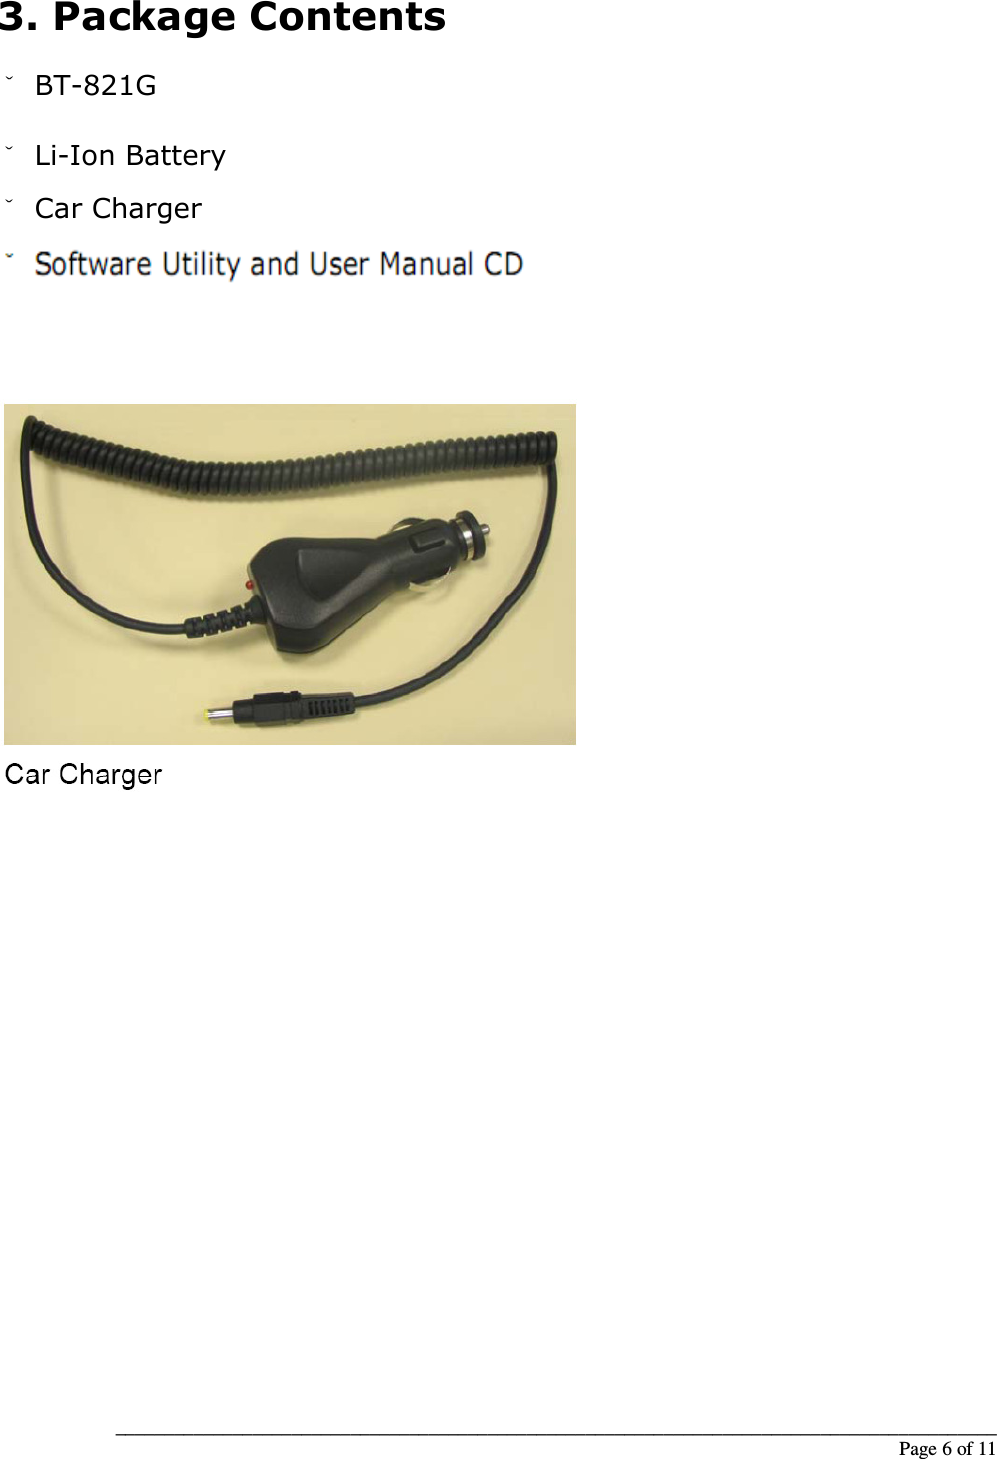 __________________________________________________________________________________________                                                                                                                                                             Page 6 of 11 3. Package Contents ˇ BT-821G   ˇ Li-Ion Battery ˇ Car Charger ˇ AC Charger (Optional) ˇ Software Utility and User Manual CD                         